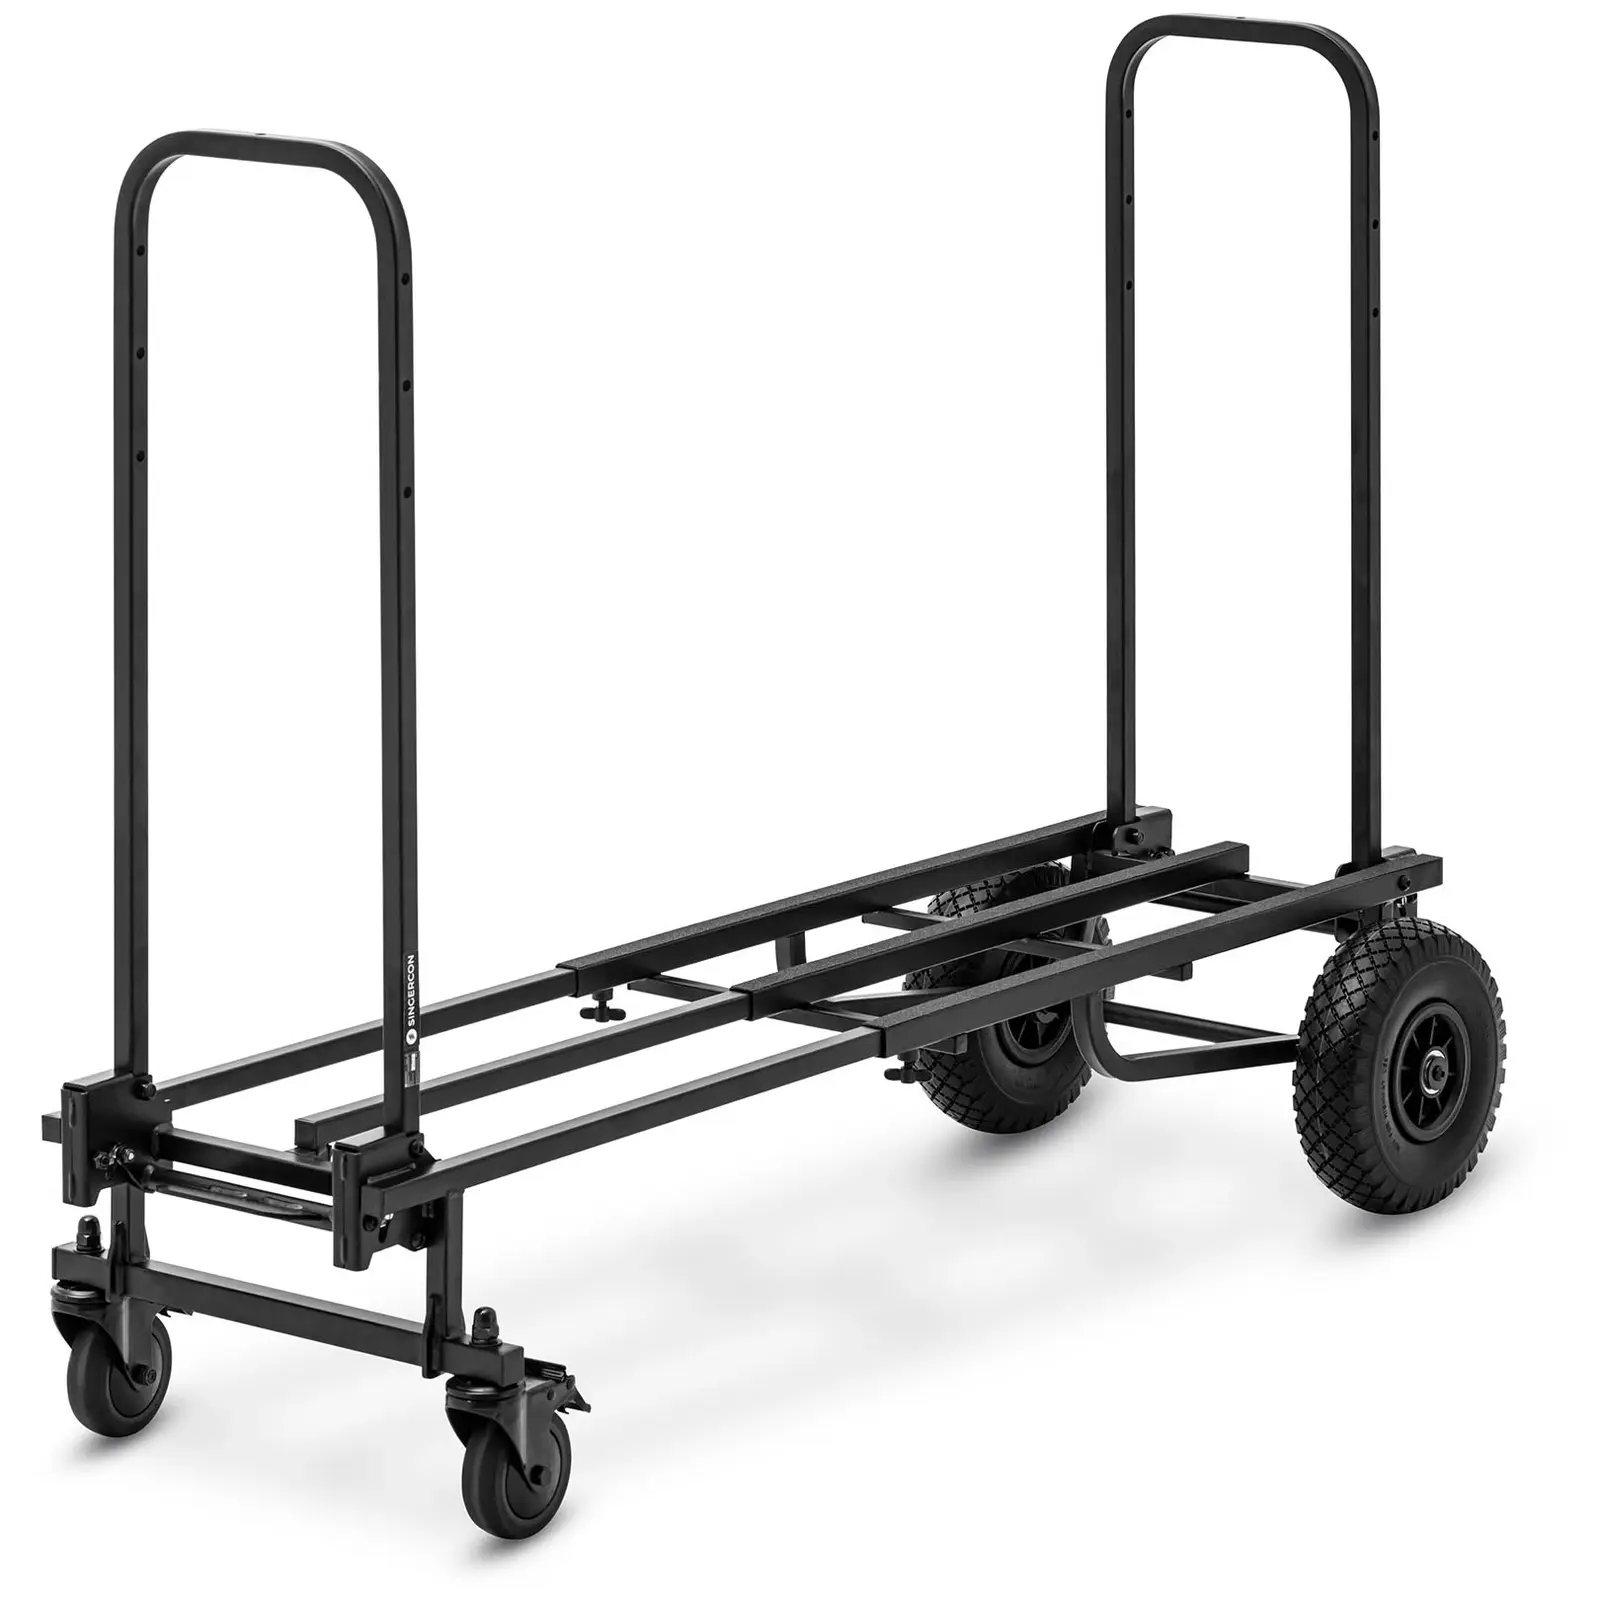 Multifunctional transport trolley - 8-in-1 configuration - 350 kg